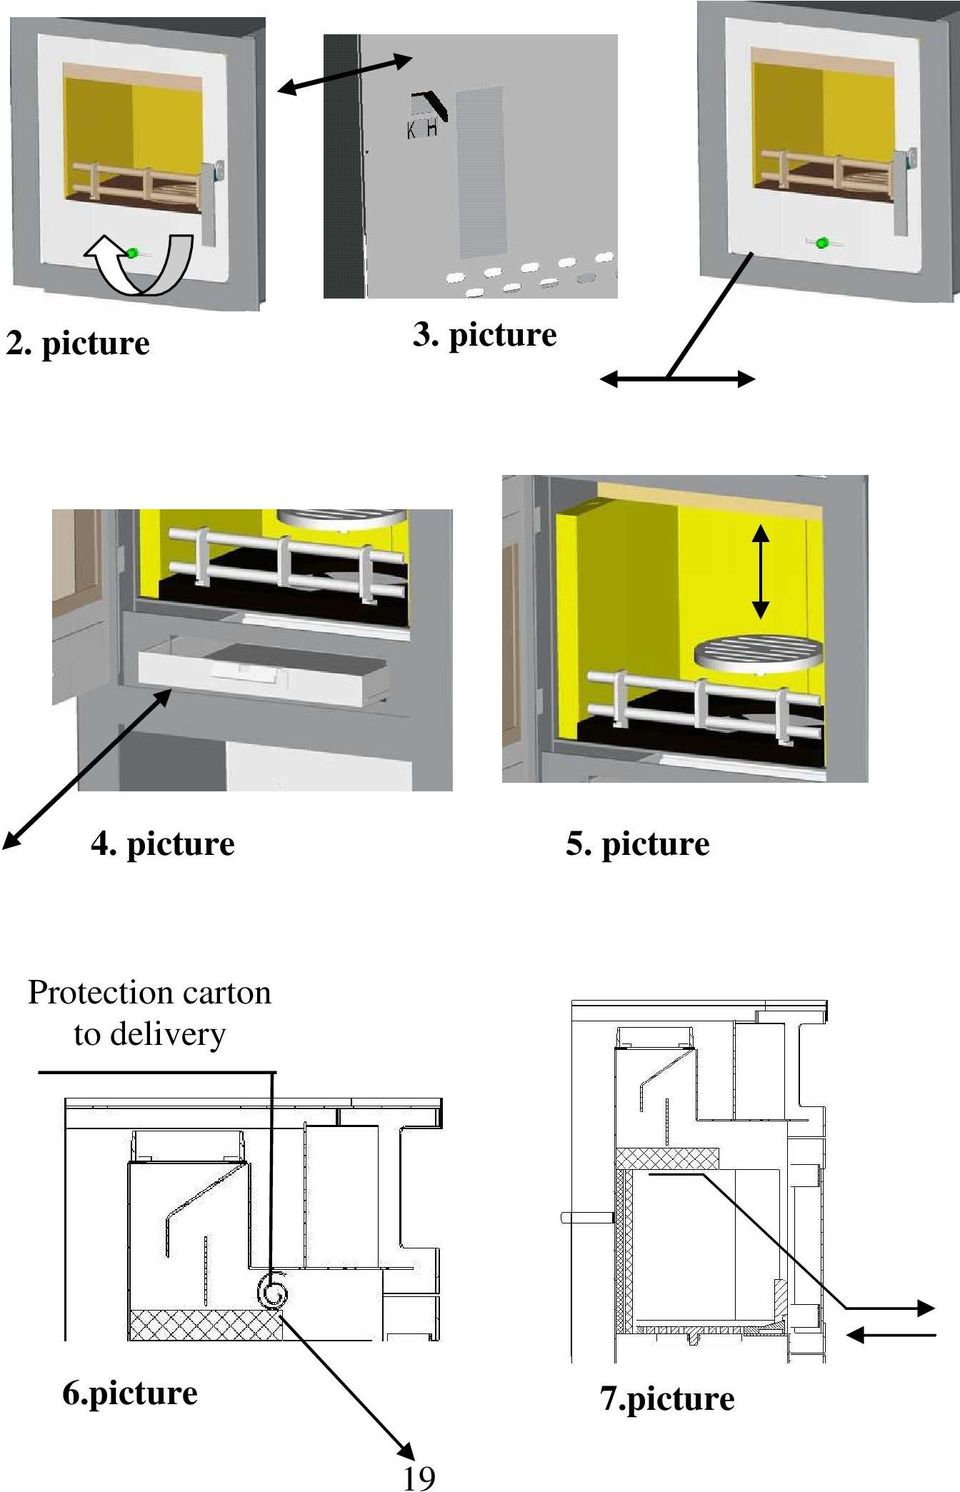 picture Protection